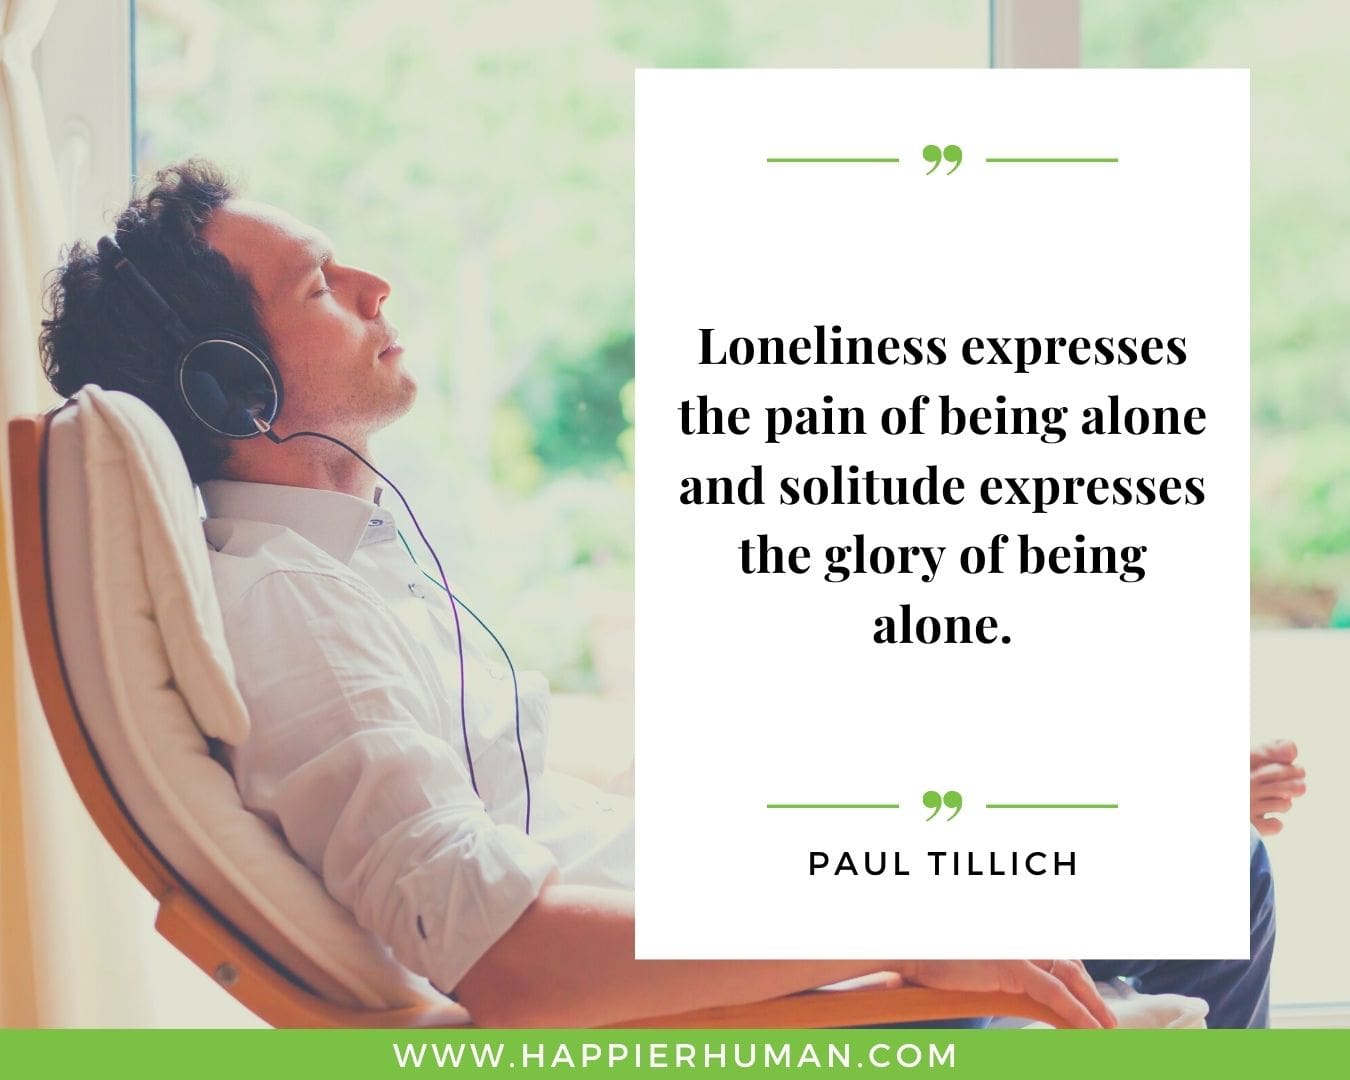 Loneliness Quotes - “Loneliness expresses the pain of being alone and solitude expresses the glory of being alone.”– Pau Tillich